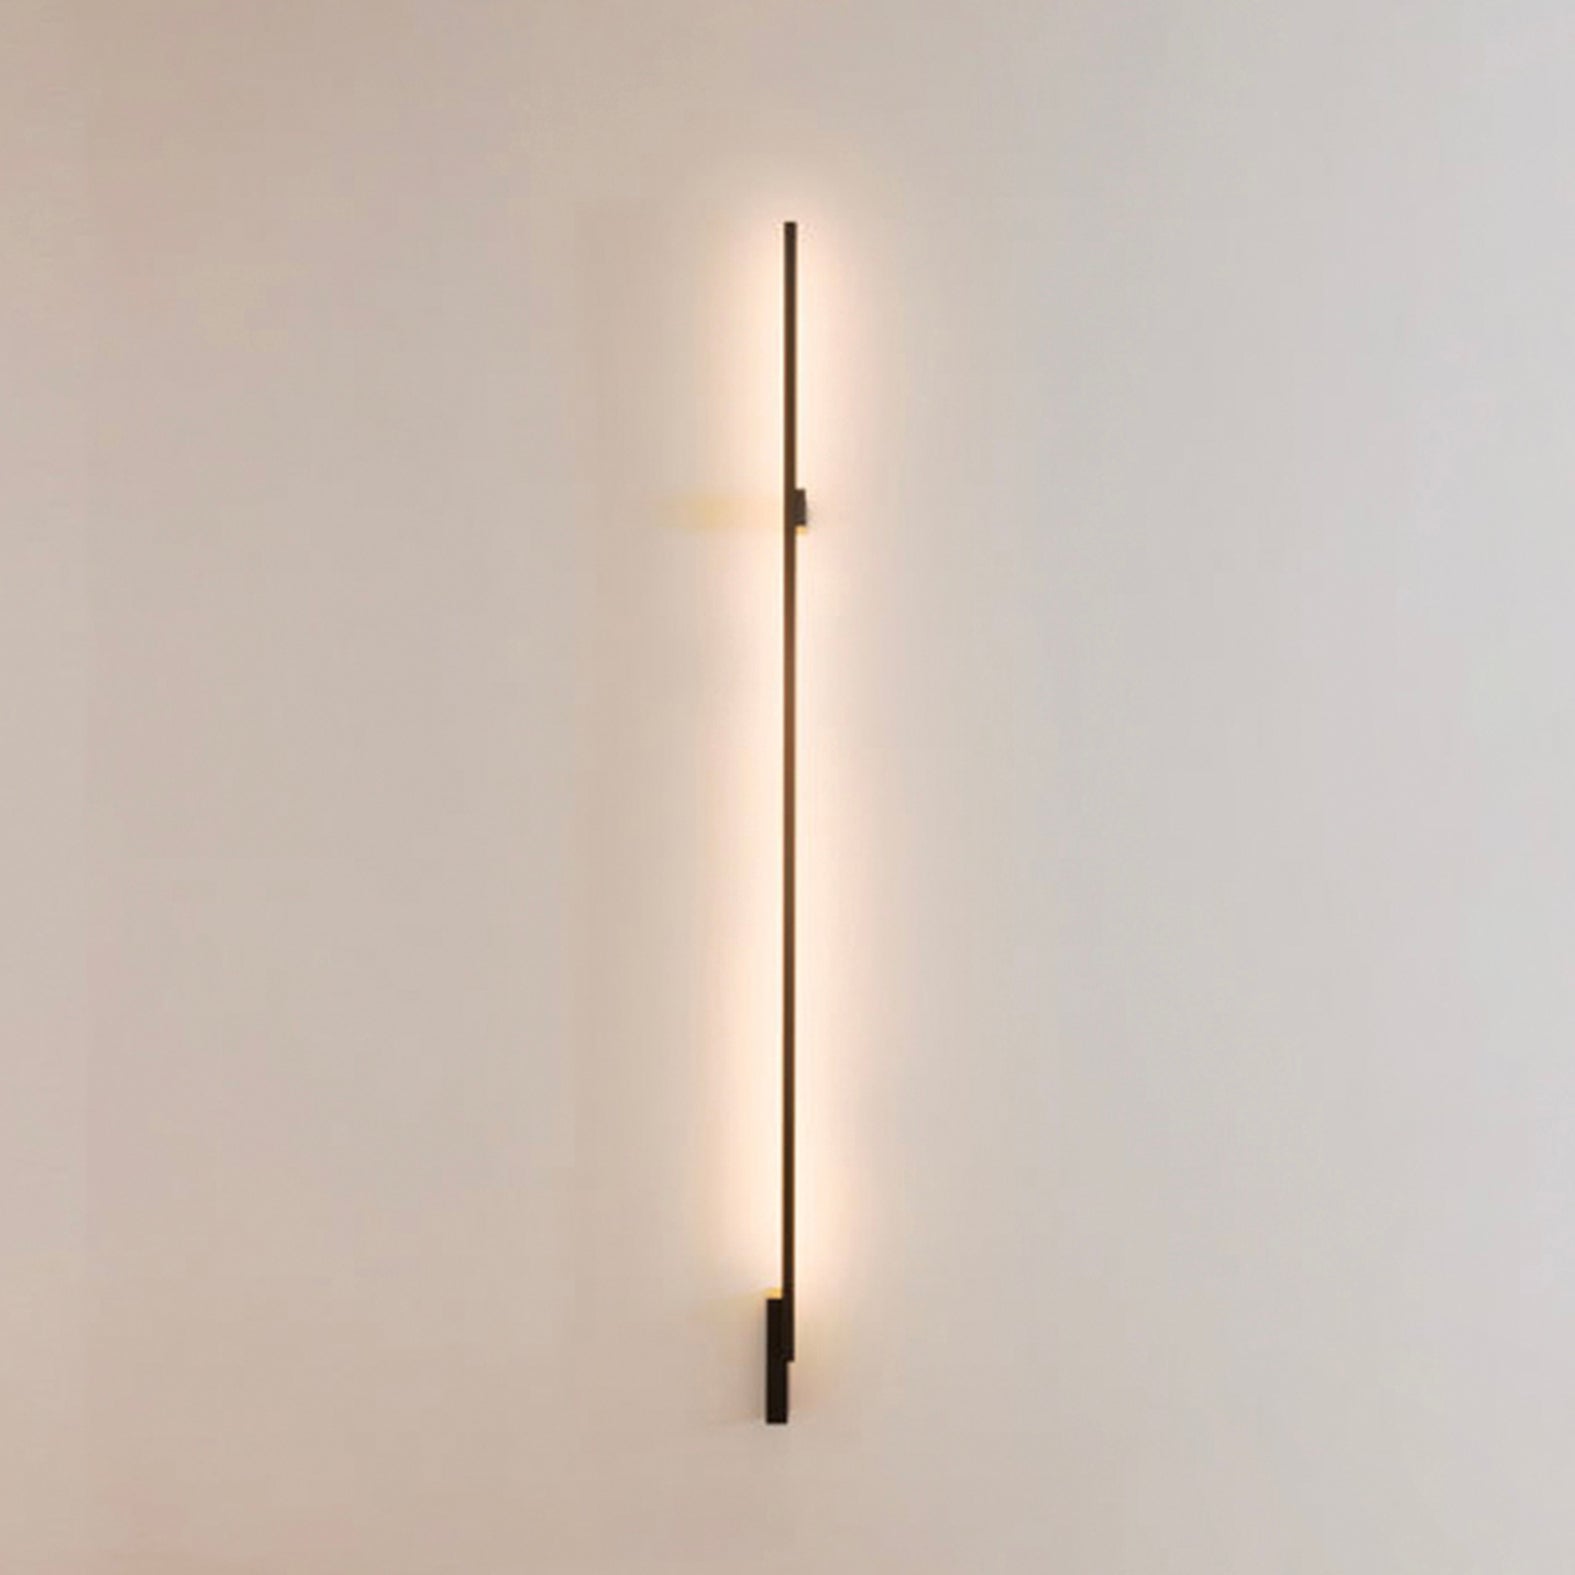 Untitled H Wall Lamp